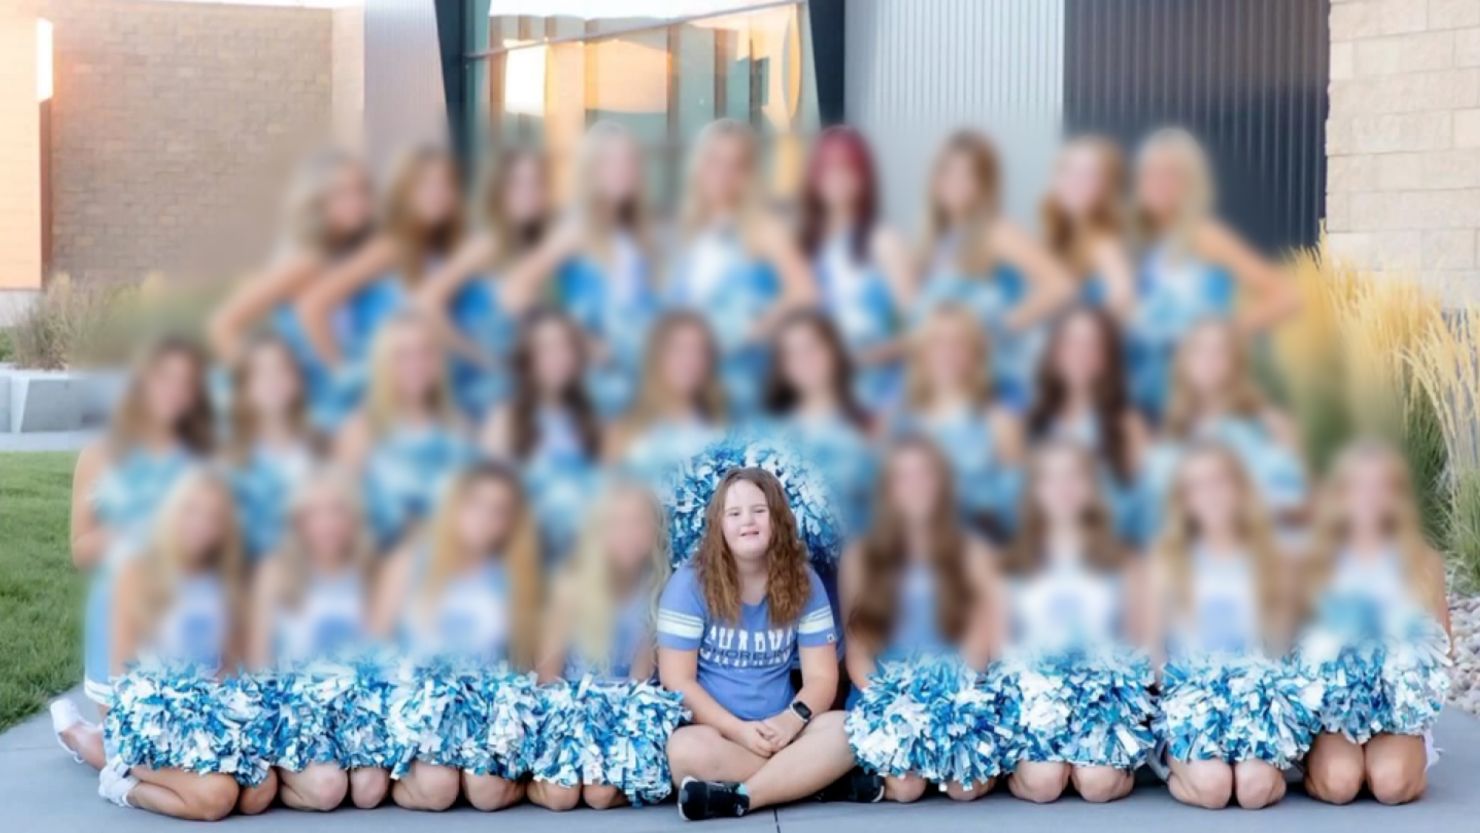 Morgyn Arnold in a photo with her cheerleading team. CNN has intentionally blurred the image. 